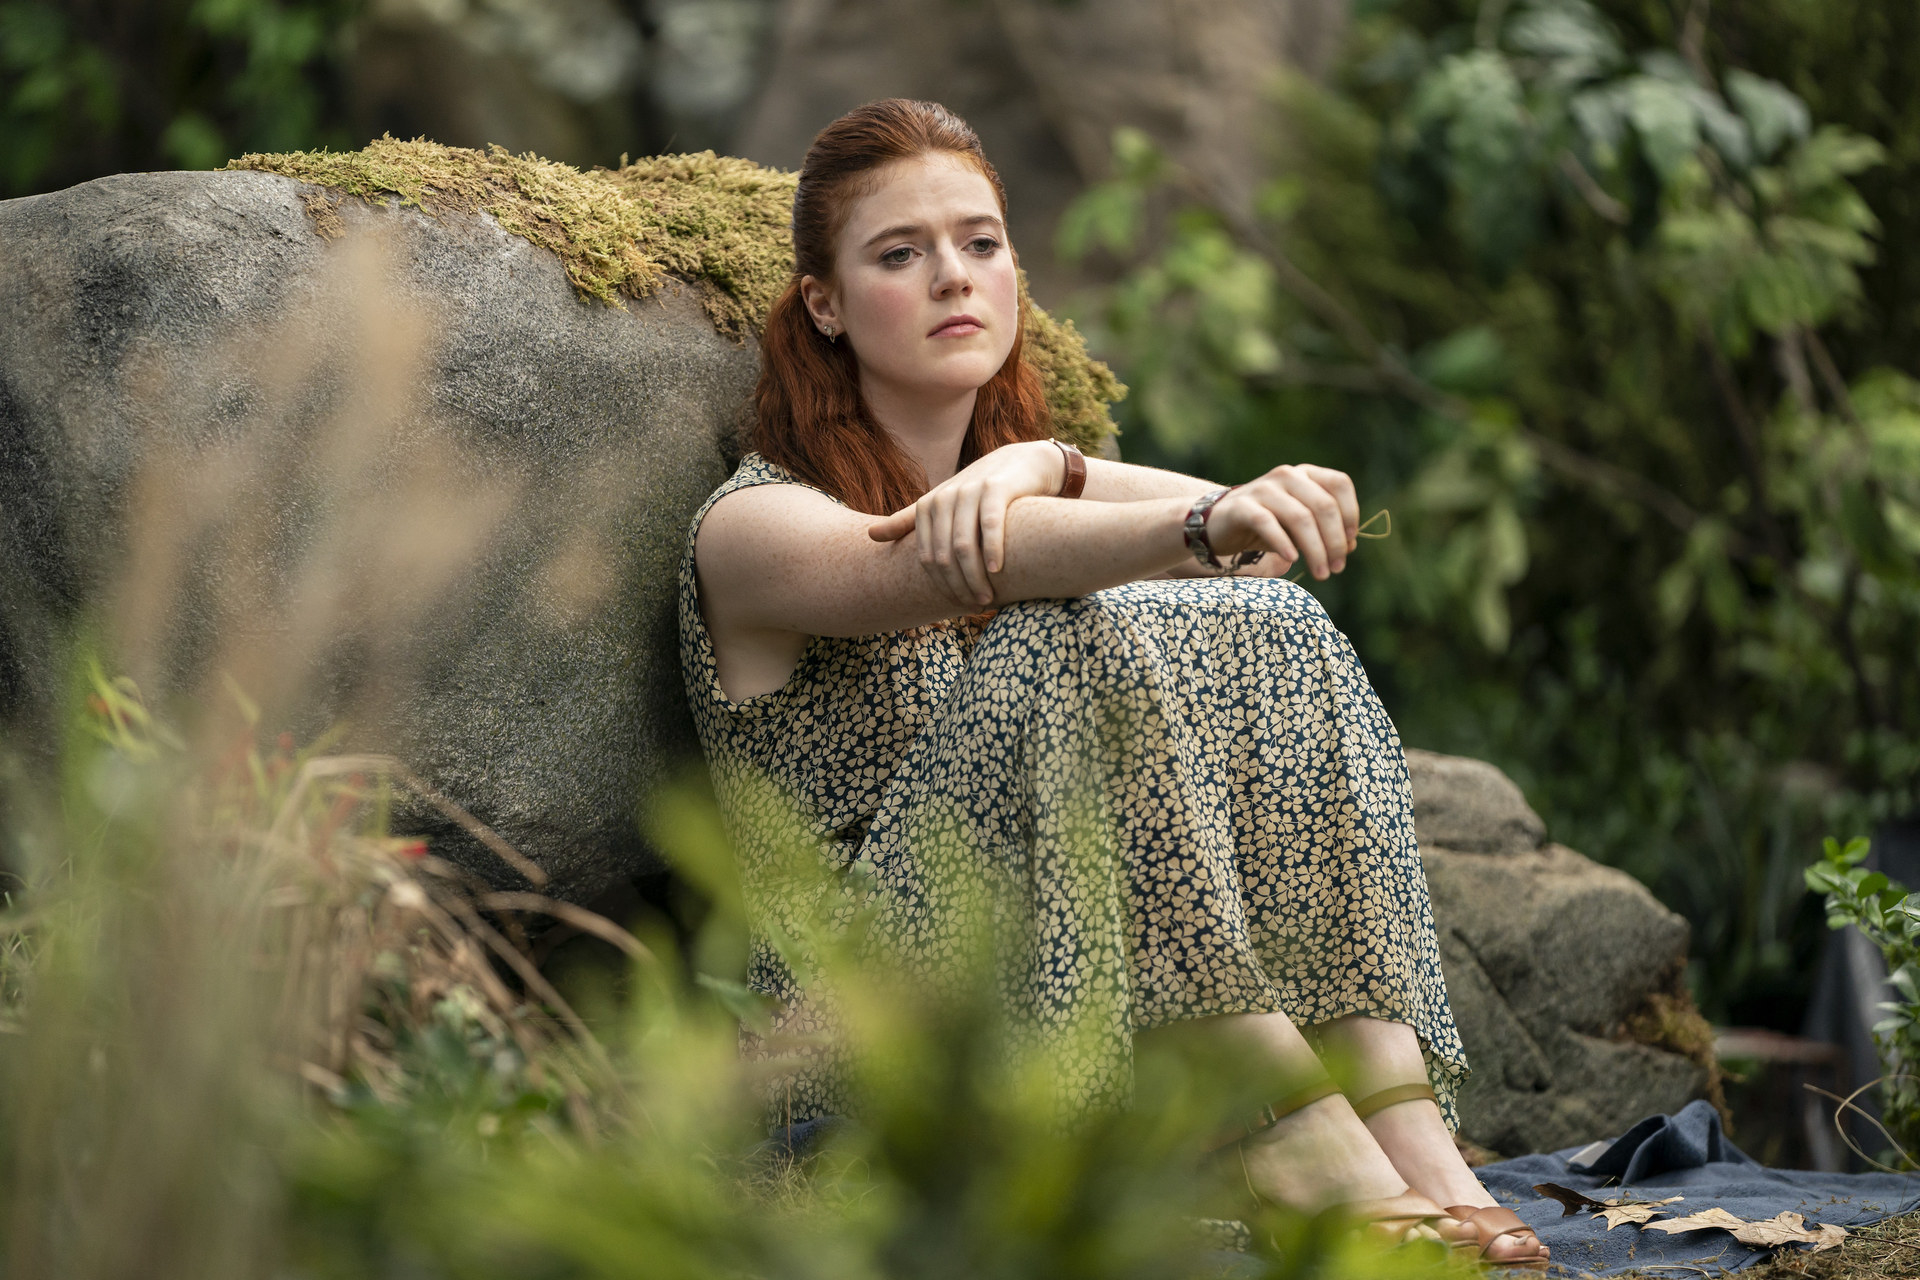 Rose (playing Clare) sitting sadly by a rock